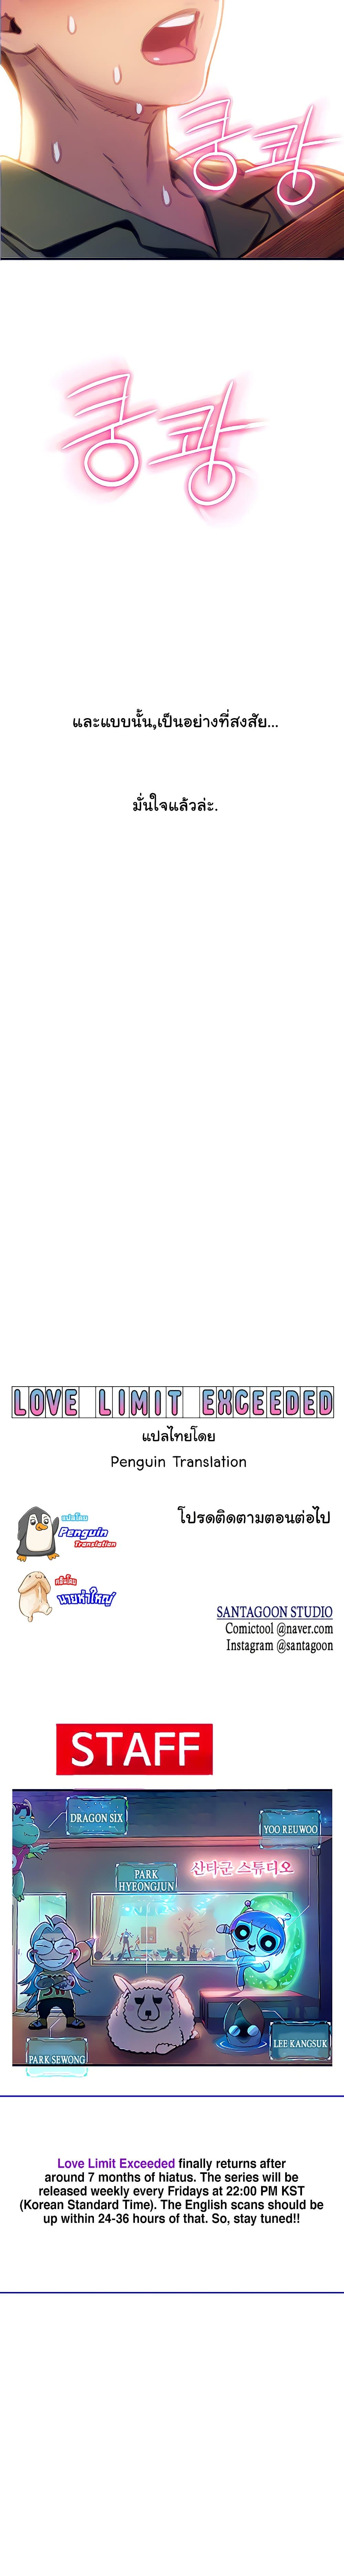 Love Limit Exceeded 10 (20)